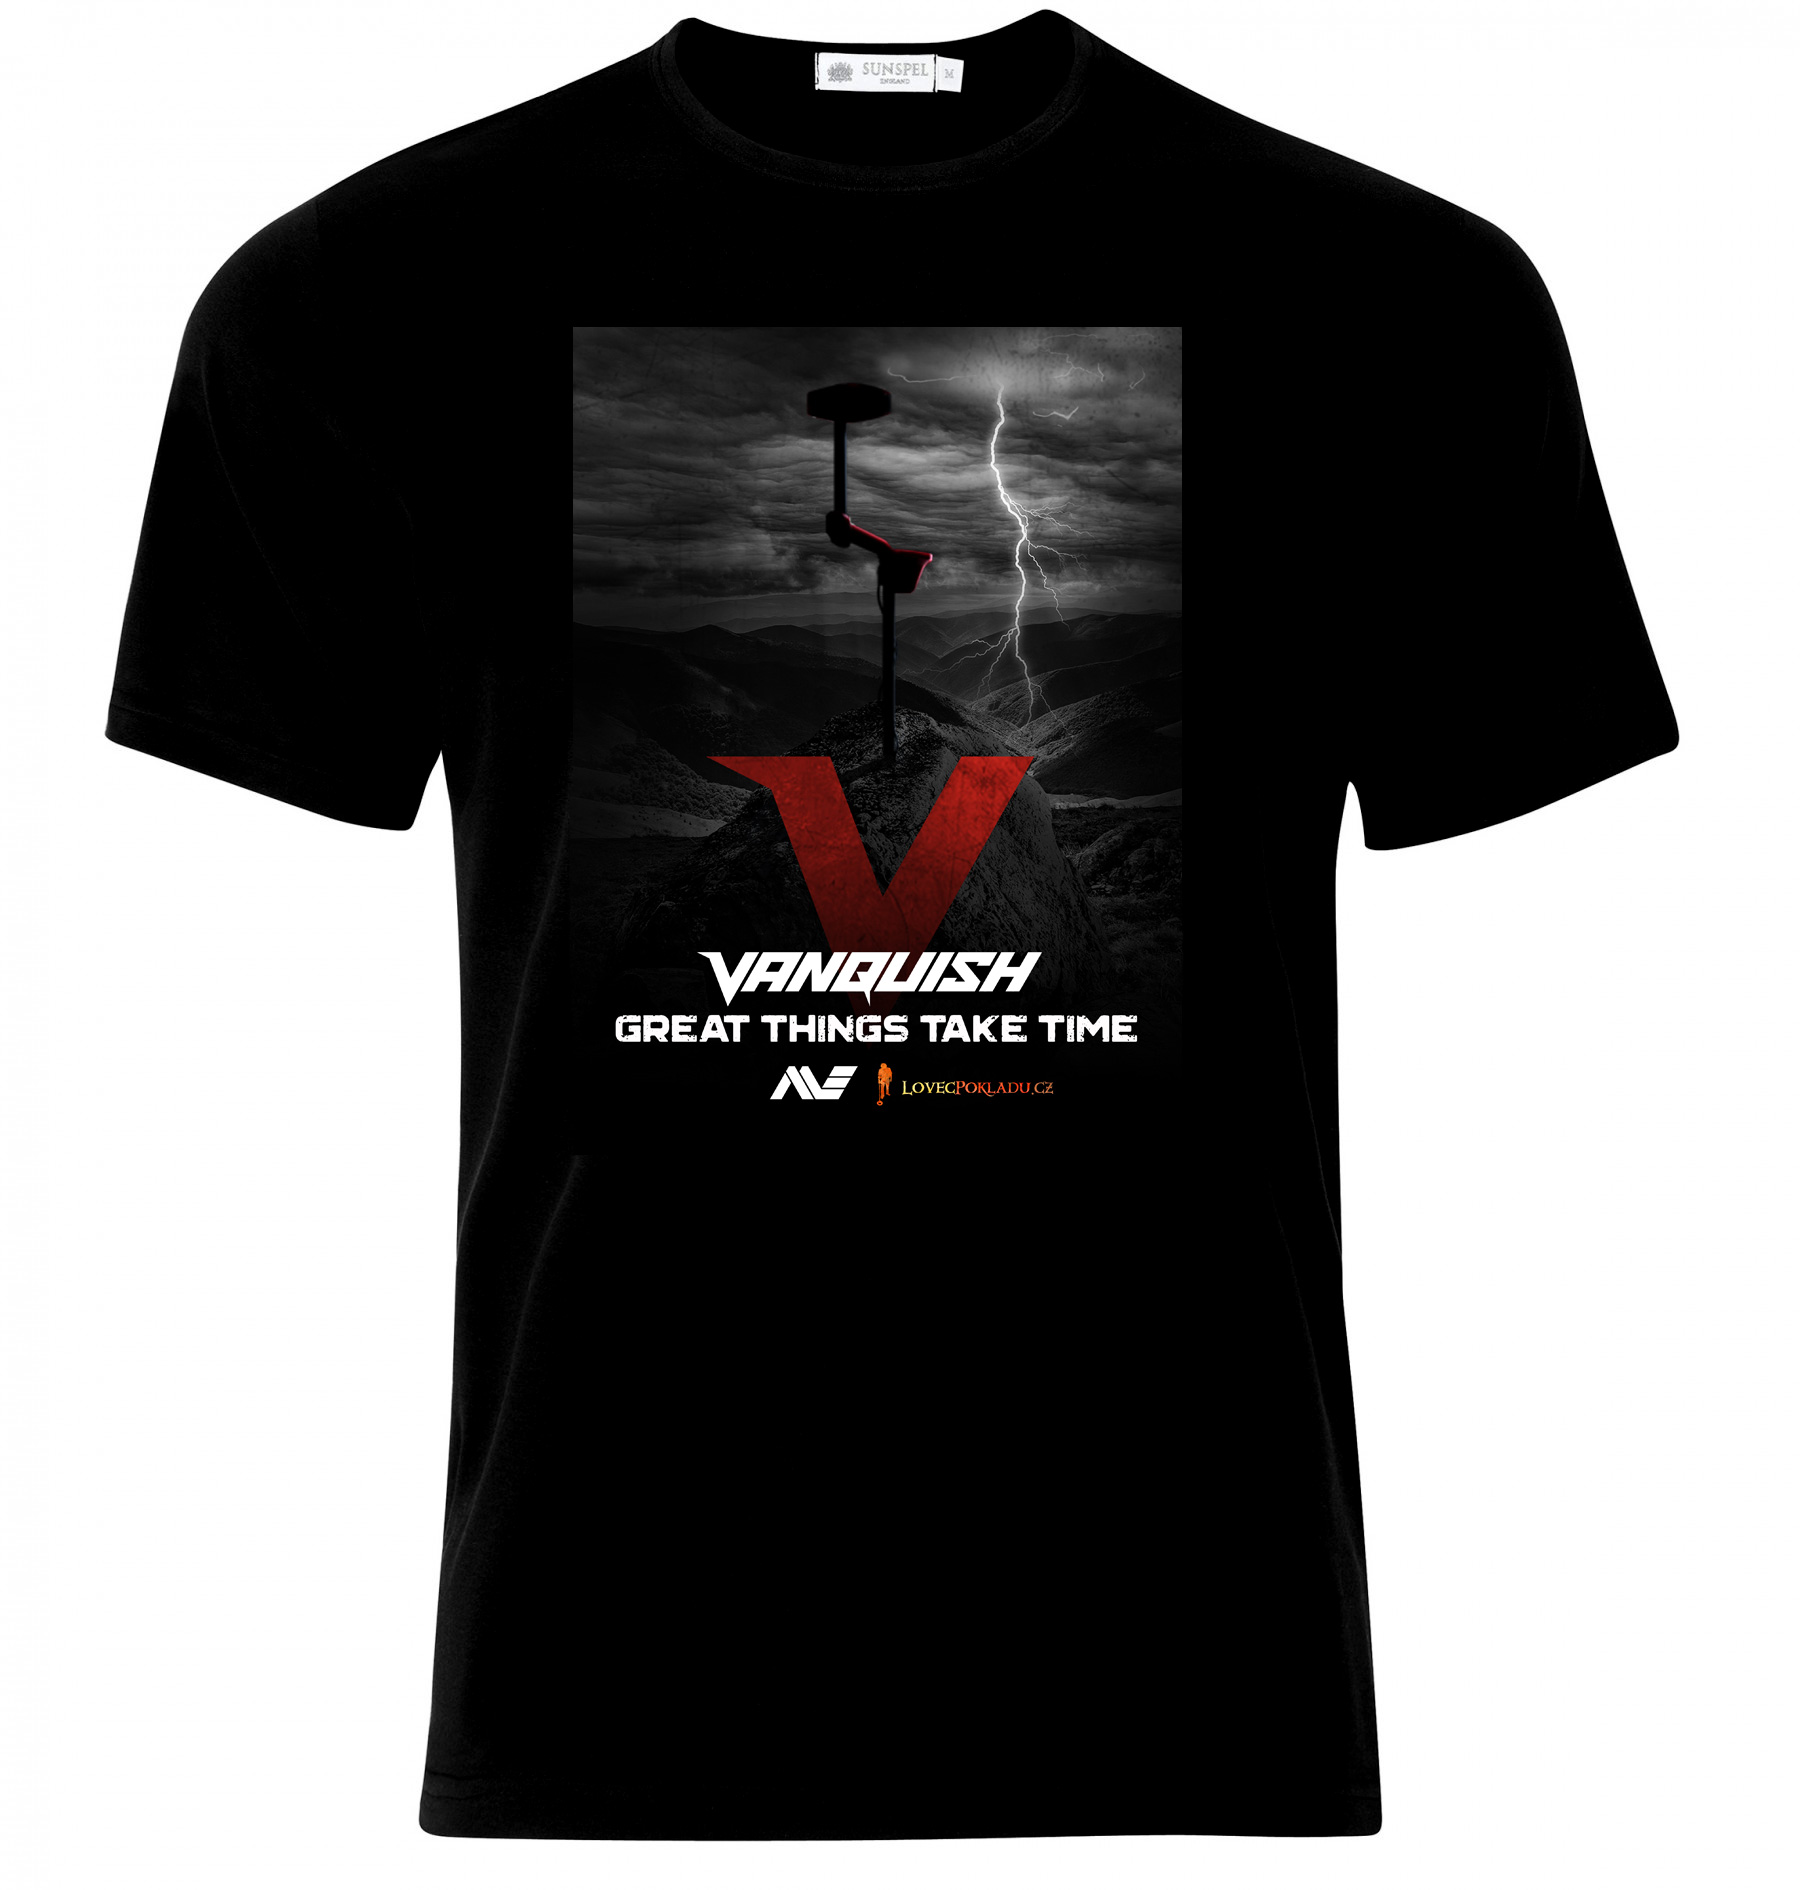 Special T-shirt for all those waiting for Vanquish